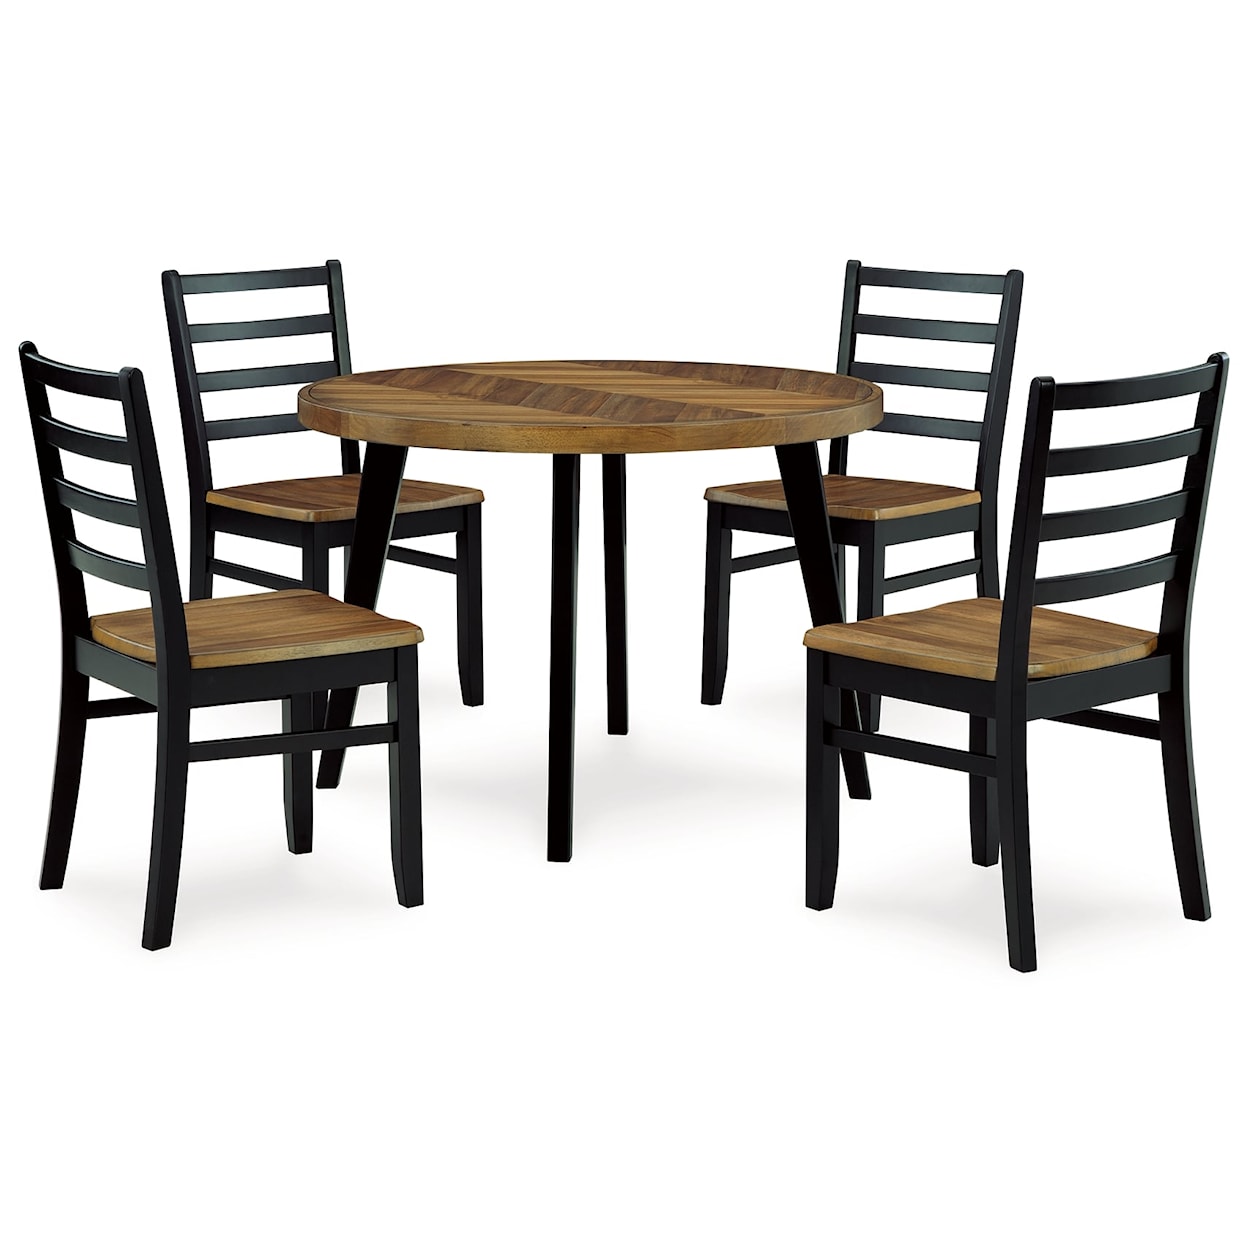 Benchcraft Blondon Dining Table And 4 Chairs (Set Of 5)